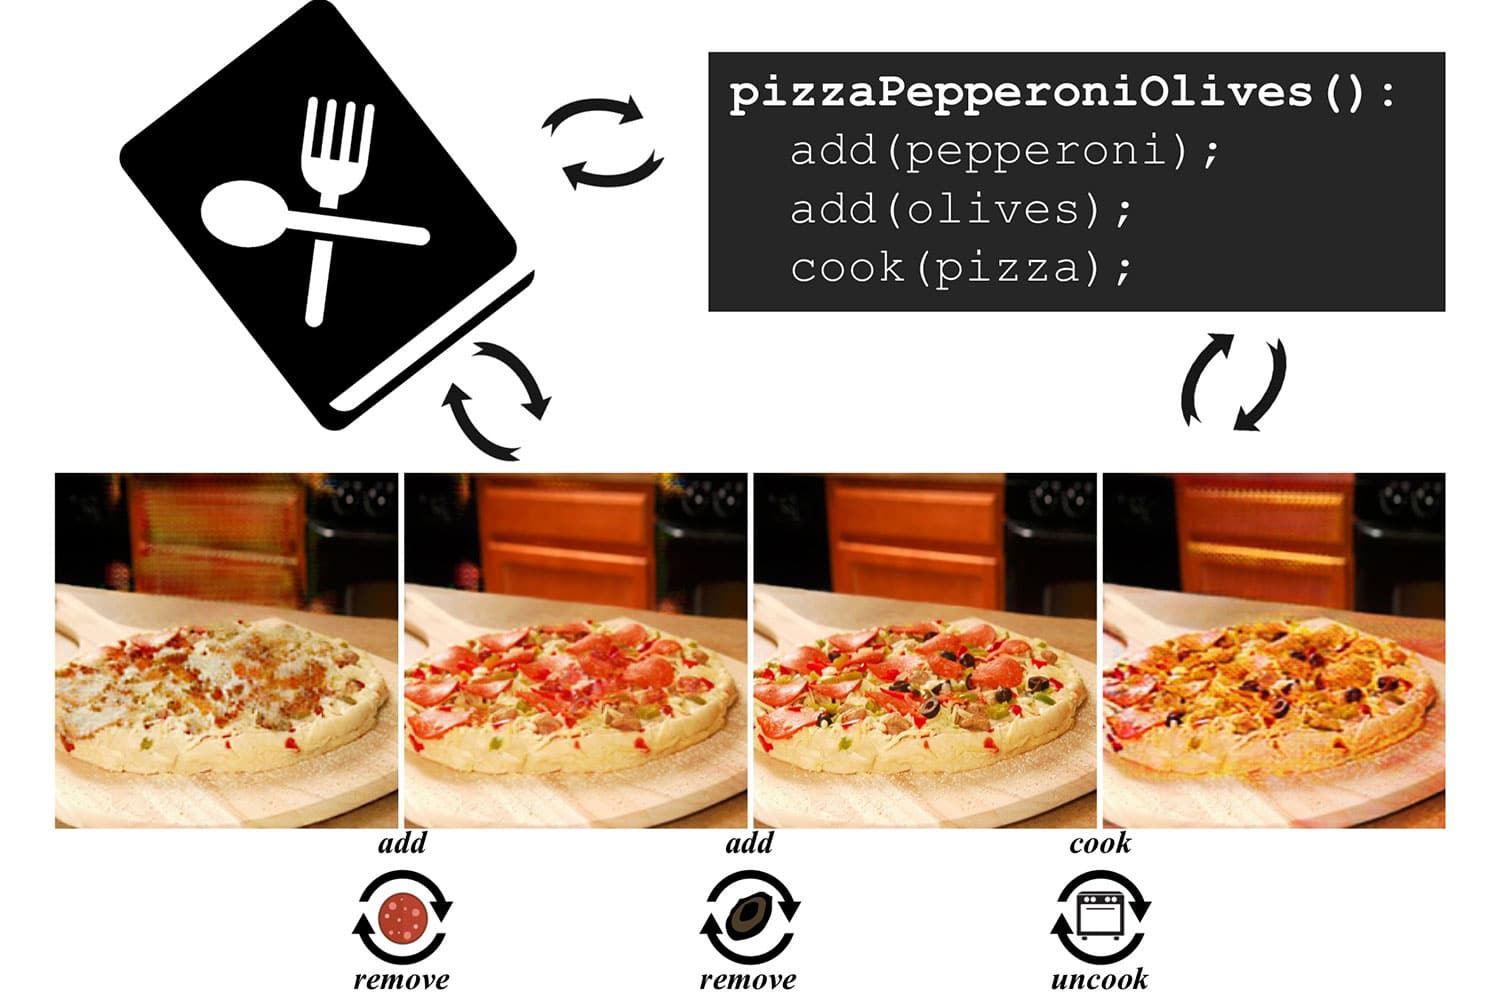 A neural network that learns how to make pizza using pictures.